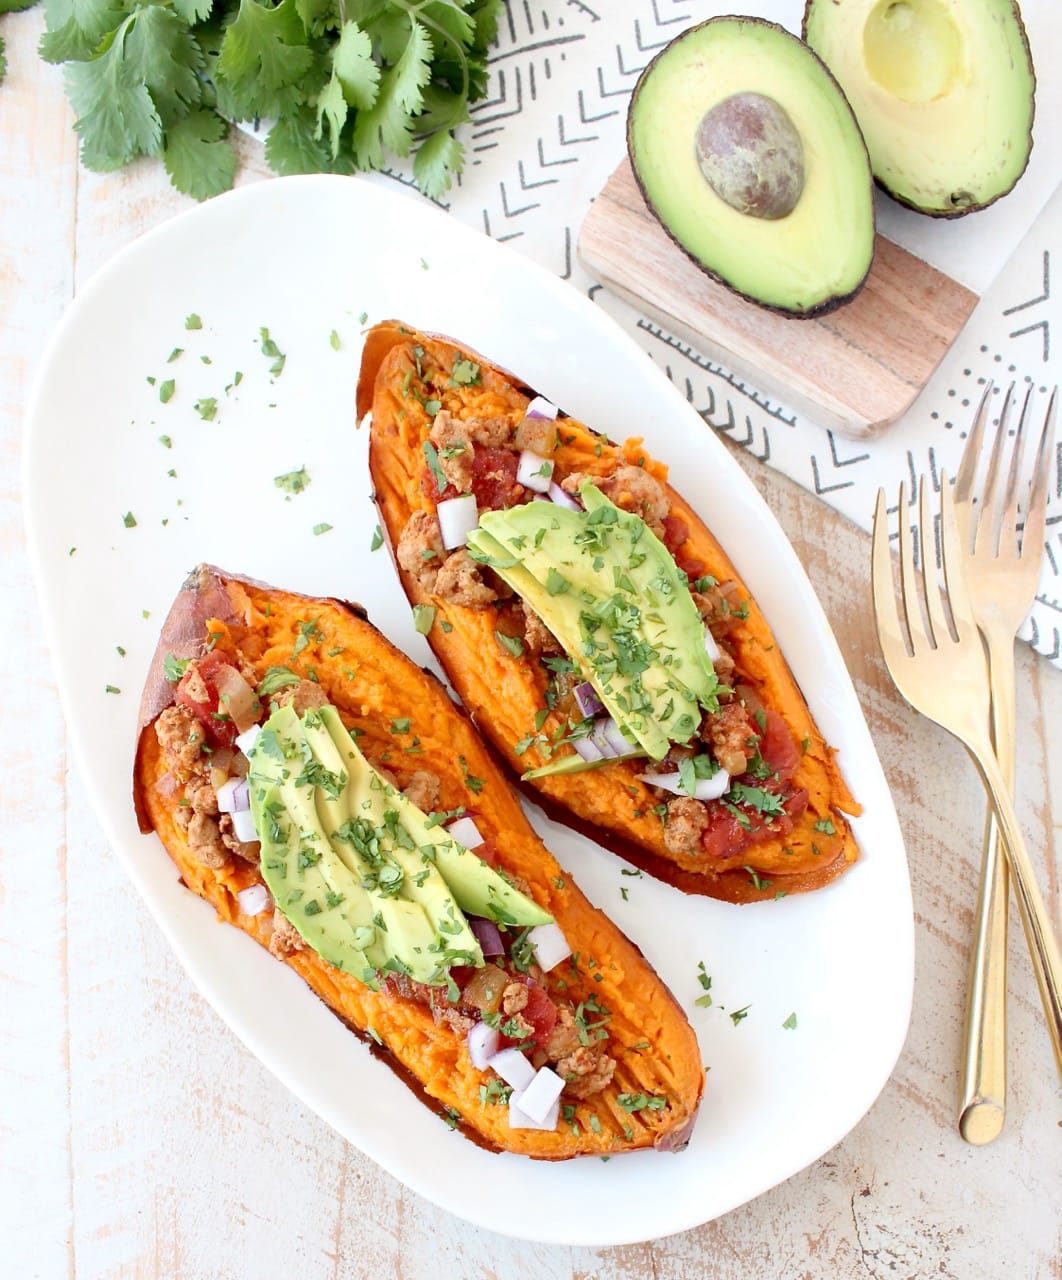 baked sweet potato cut in half and topped with chili and sliced avocado on a white plate